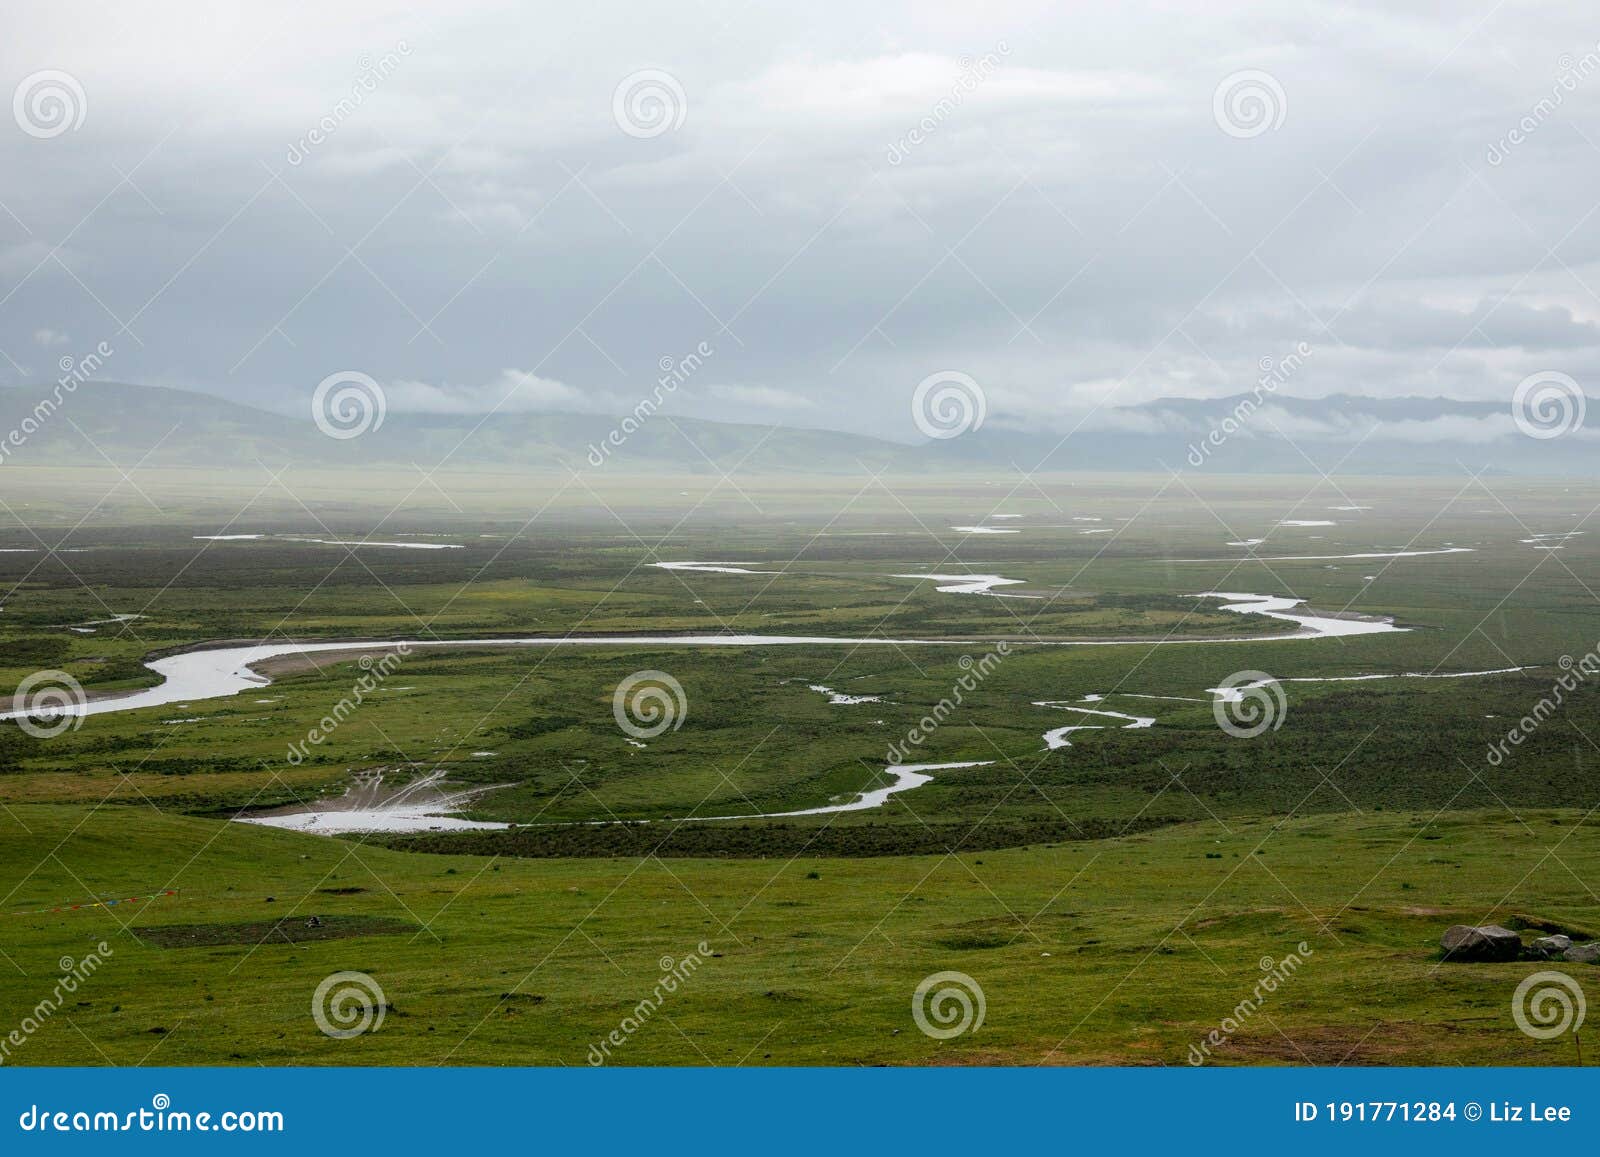 the mountains are surrounded by clouds and the wetlands after the rain